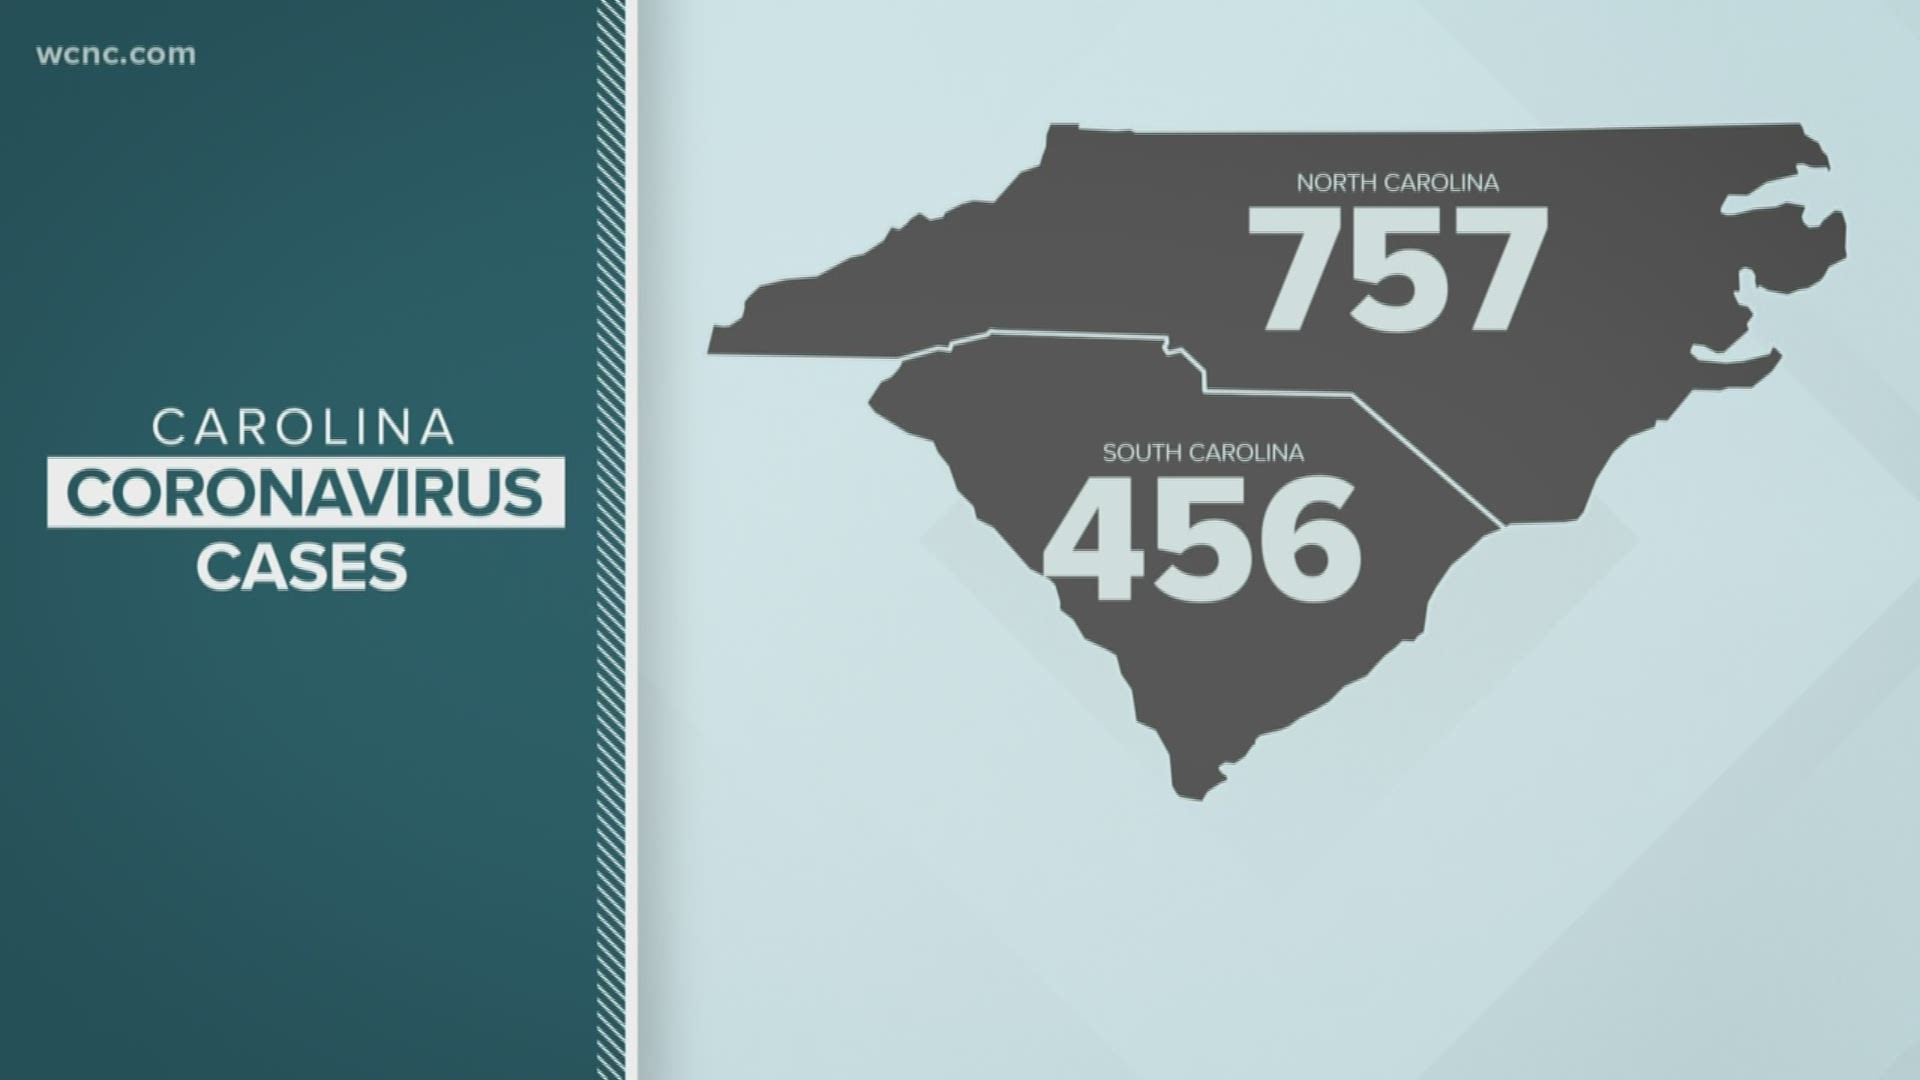 There are at least 757 cases of COVID-19 coronavirus in North Carolina, including three deaths. That number is expected to climb in the coming days and weeks.